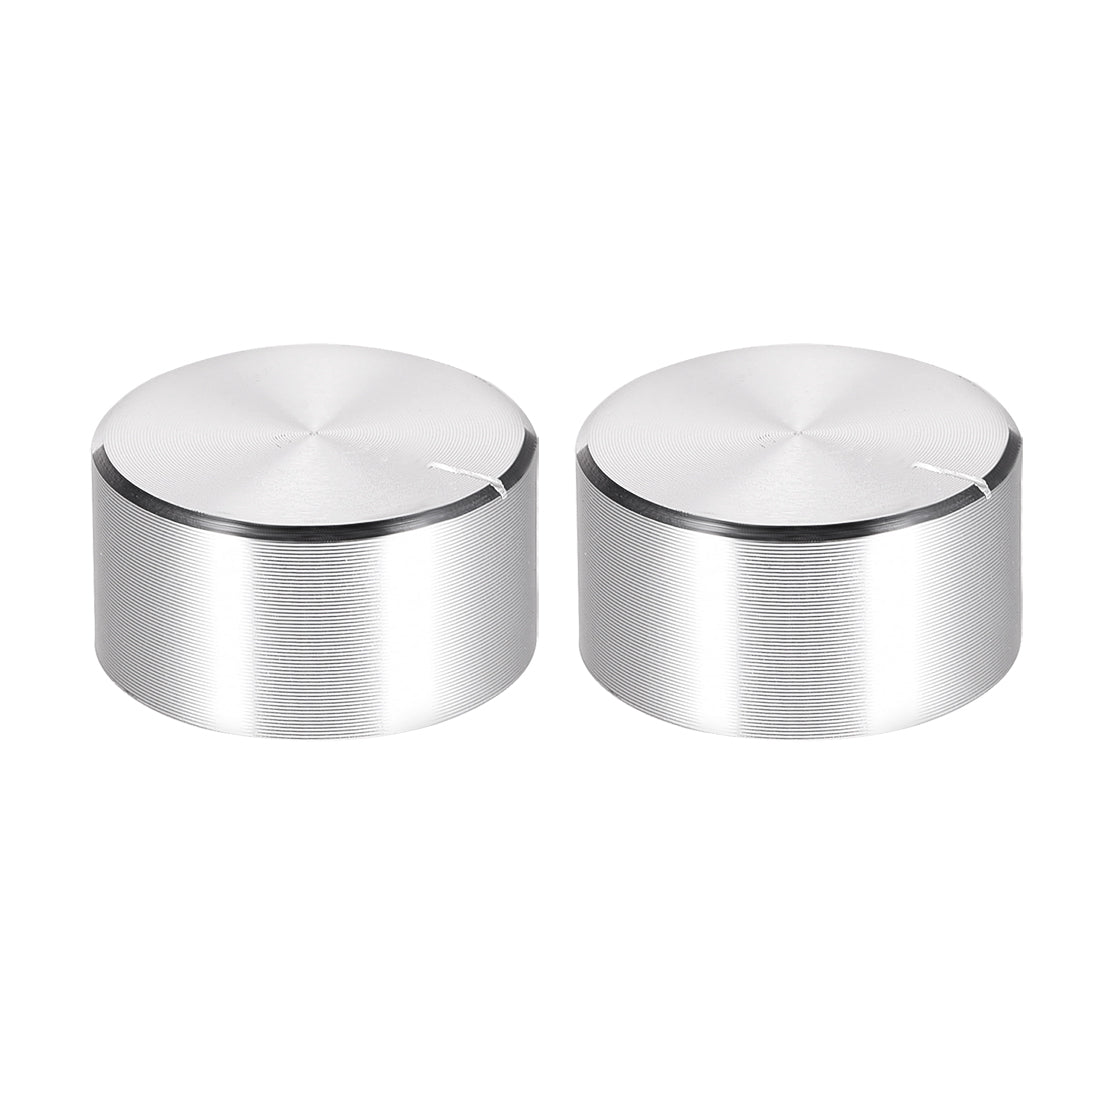 uxcell Uxcell 2pcs Potentiometer Knob Knurled Shaft Silver Tone Aluminum Smooth Surface Rotary Knob 25mmx13mm Volume Control Knob